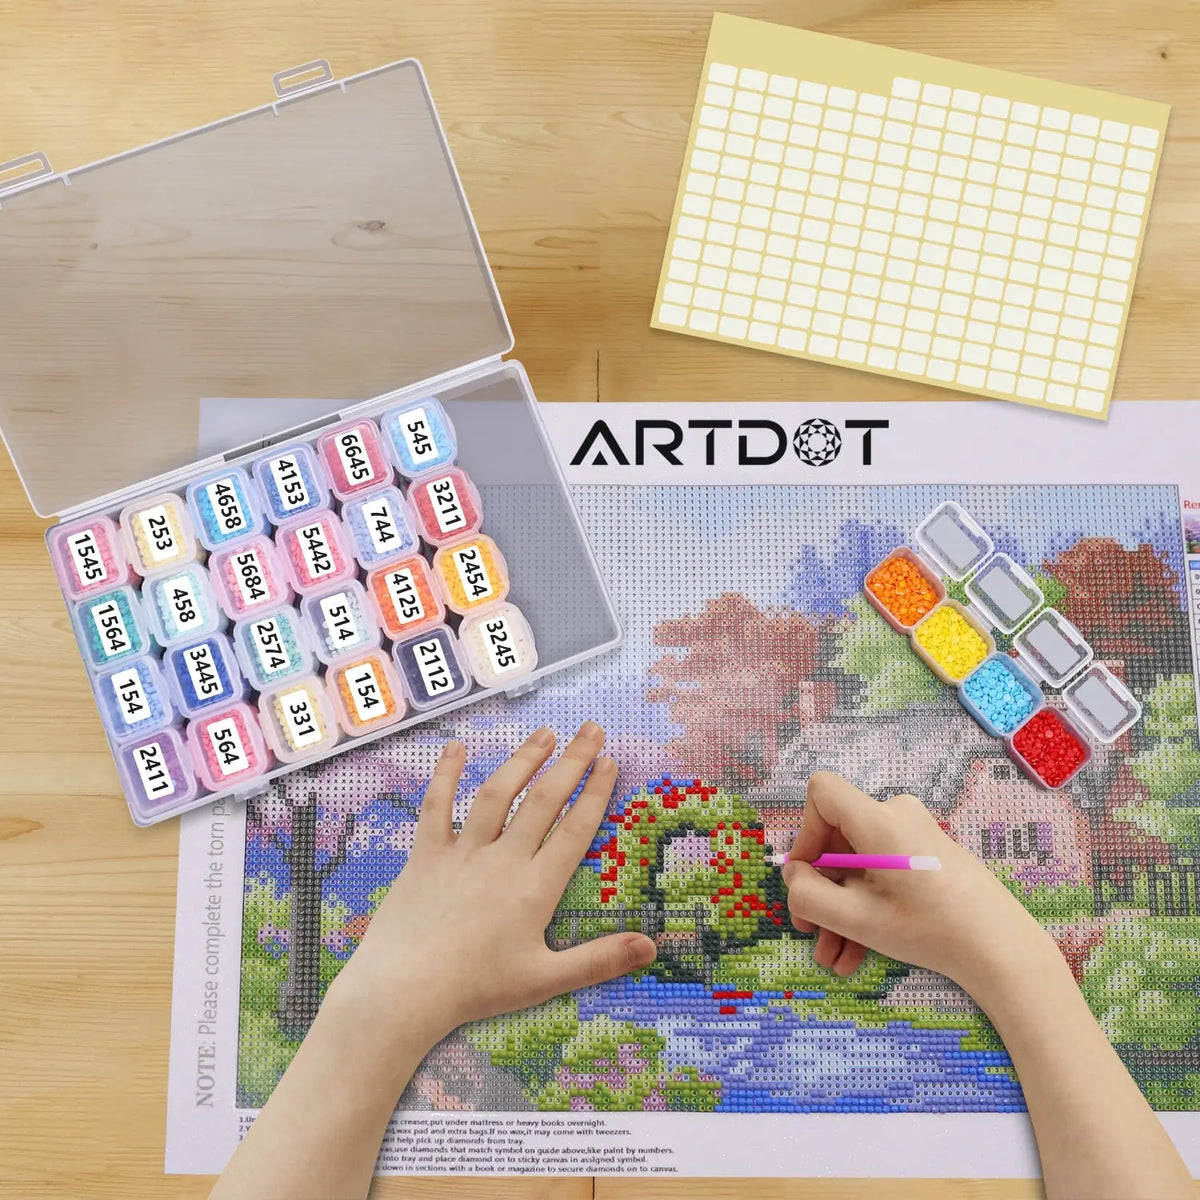 Ipart ARTDOT 4 Pack 5D Diamond Painting Kits for Adult, Full Drill